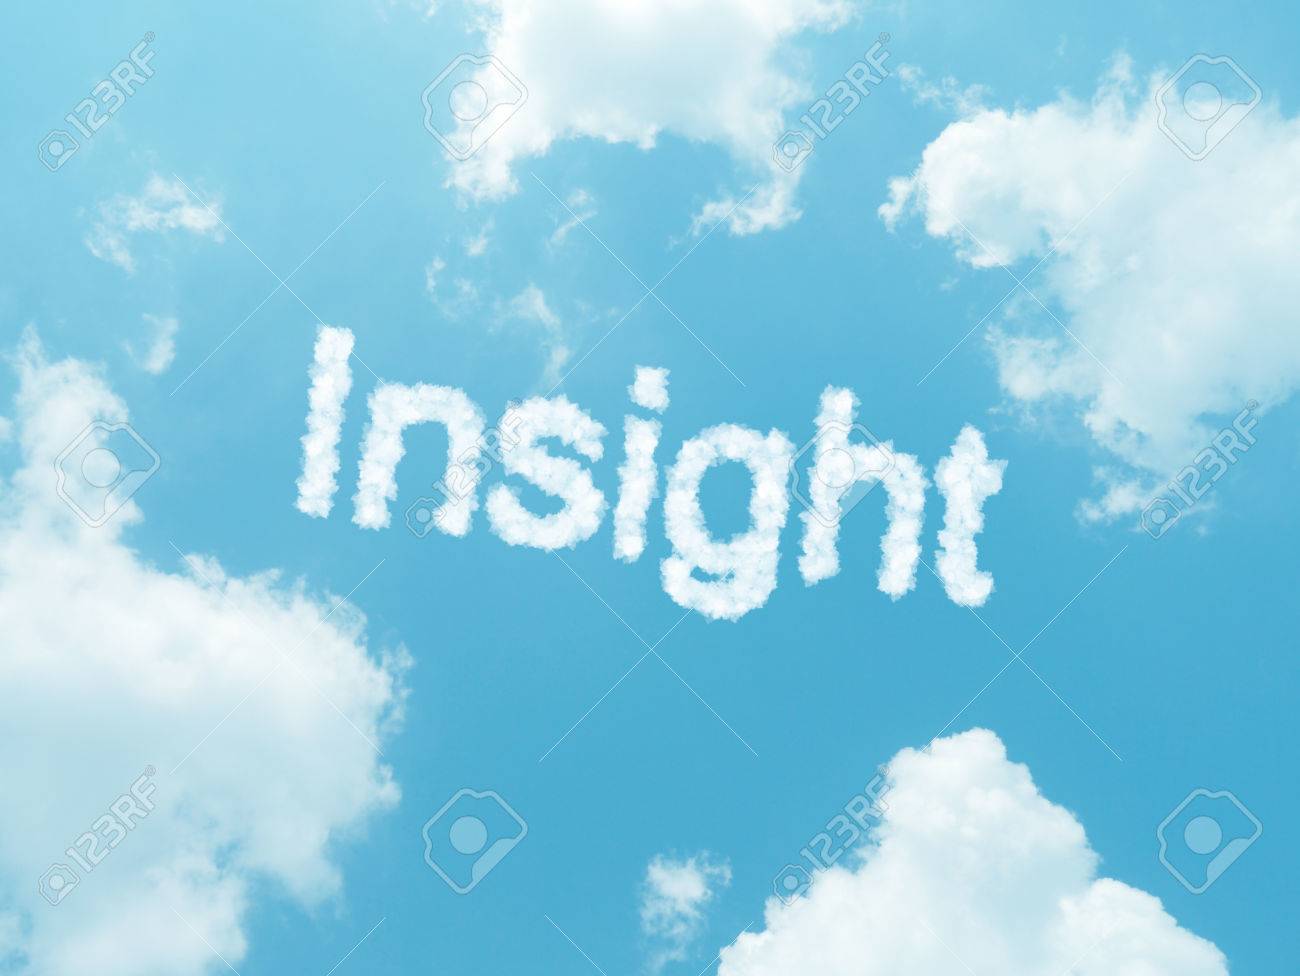 Insight Cloud Word With Design On Blue Sky Background Stock Photo